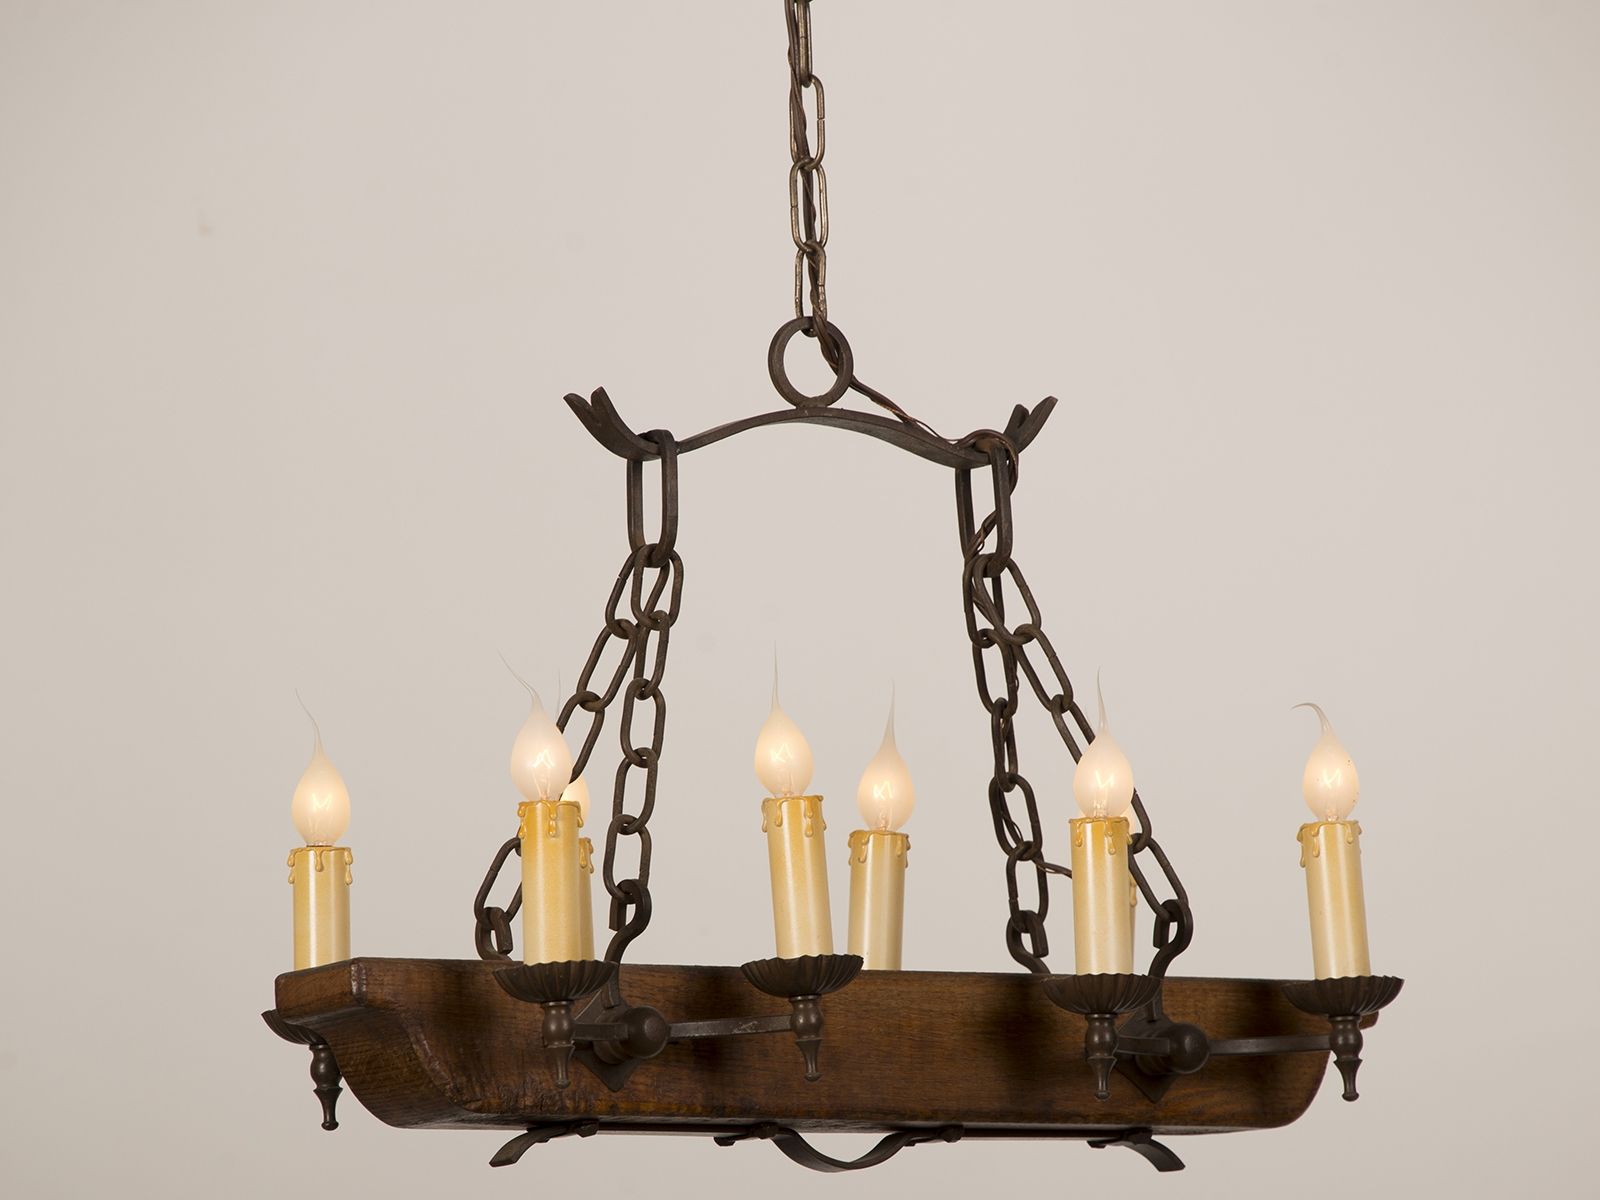 Lighting Incredible Wooden Chandeliers For Home Accessories Ideas Regarding Wooden Chandeliers (View 9 of 15)